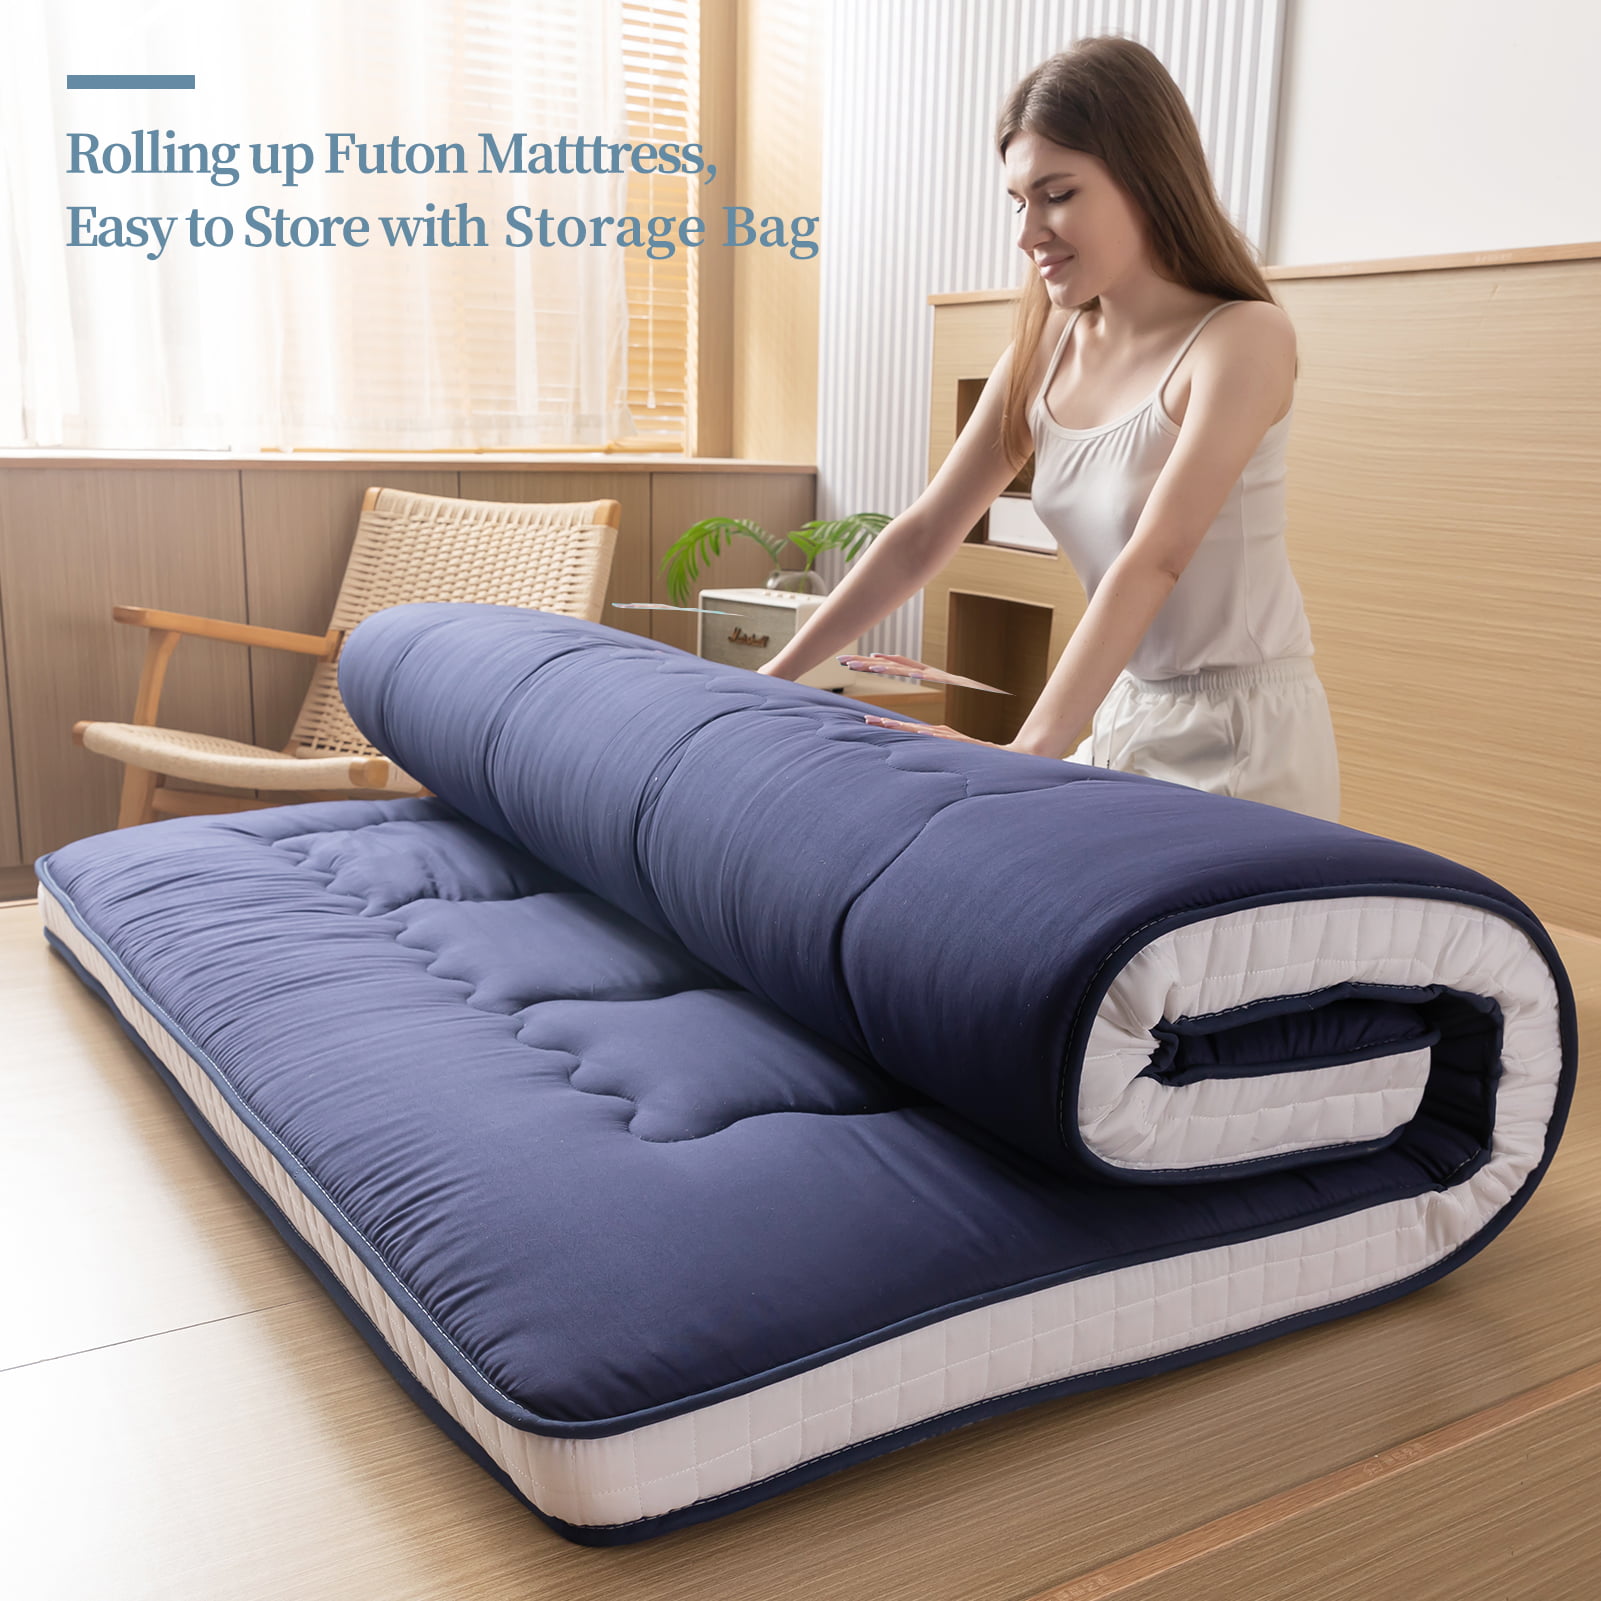 Traditional Floor Mattress, Japanese Futon Mattress for Adults, Rolling Up  Sleeping Mattress Tatami Mat for Guest Room Dormitory Bedroom,Navy,Full